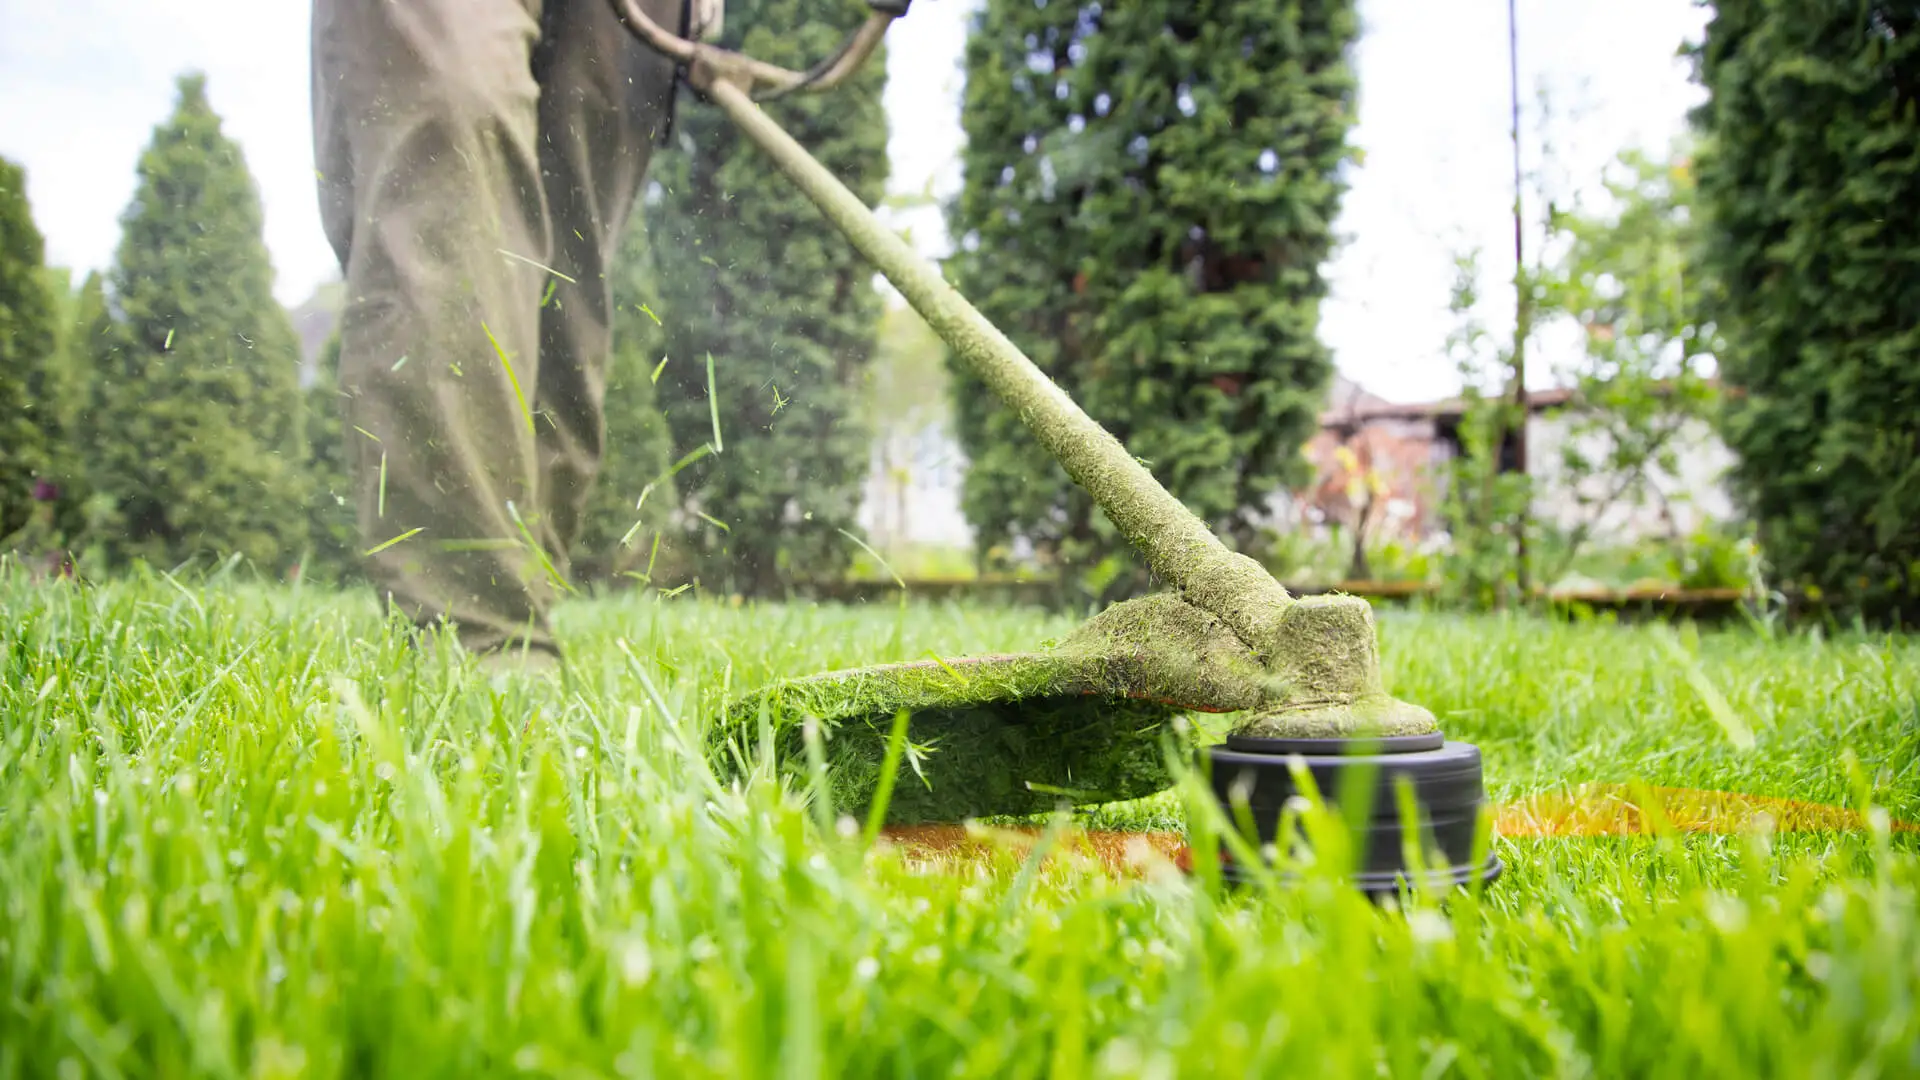 How to Know You’ve Hired Experts in Lawn Care – Murphy TX Experts Share Their Best Mowing Practices